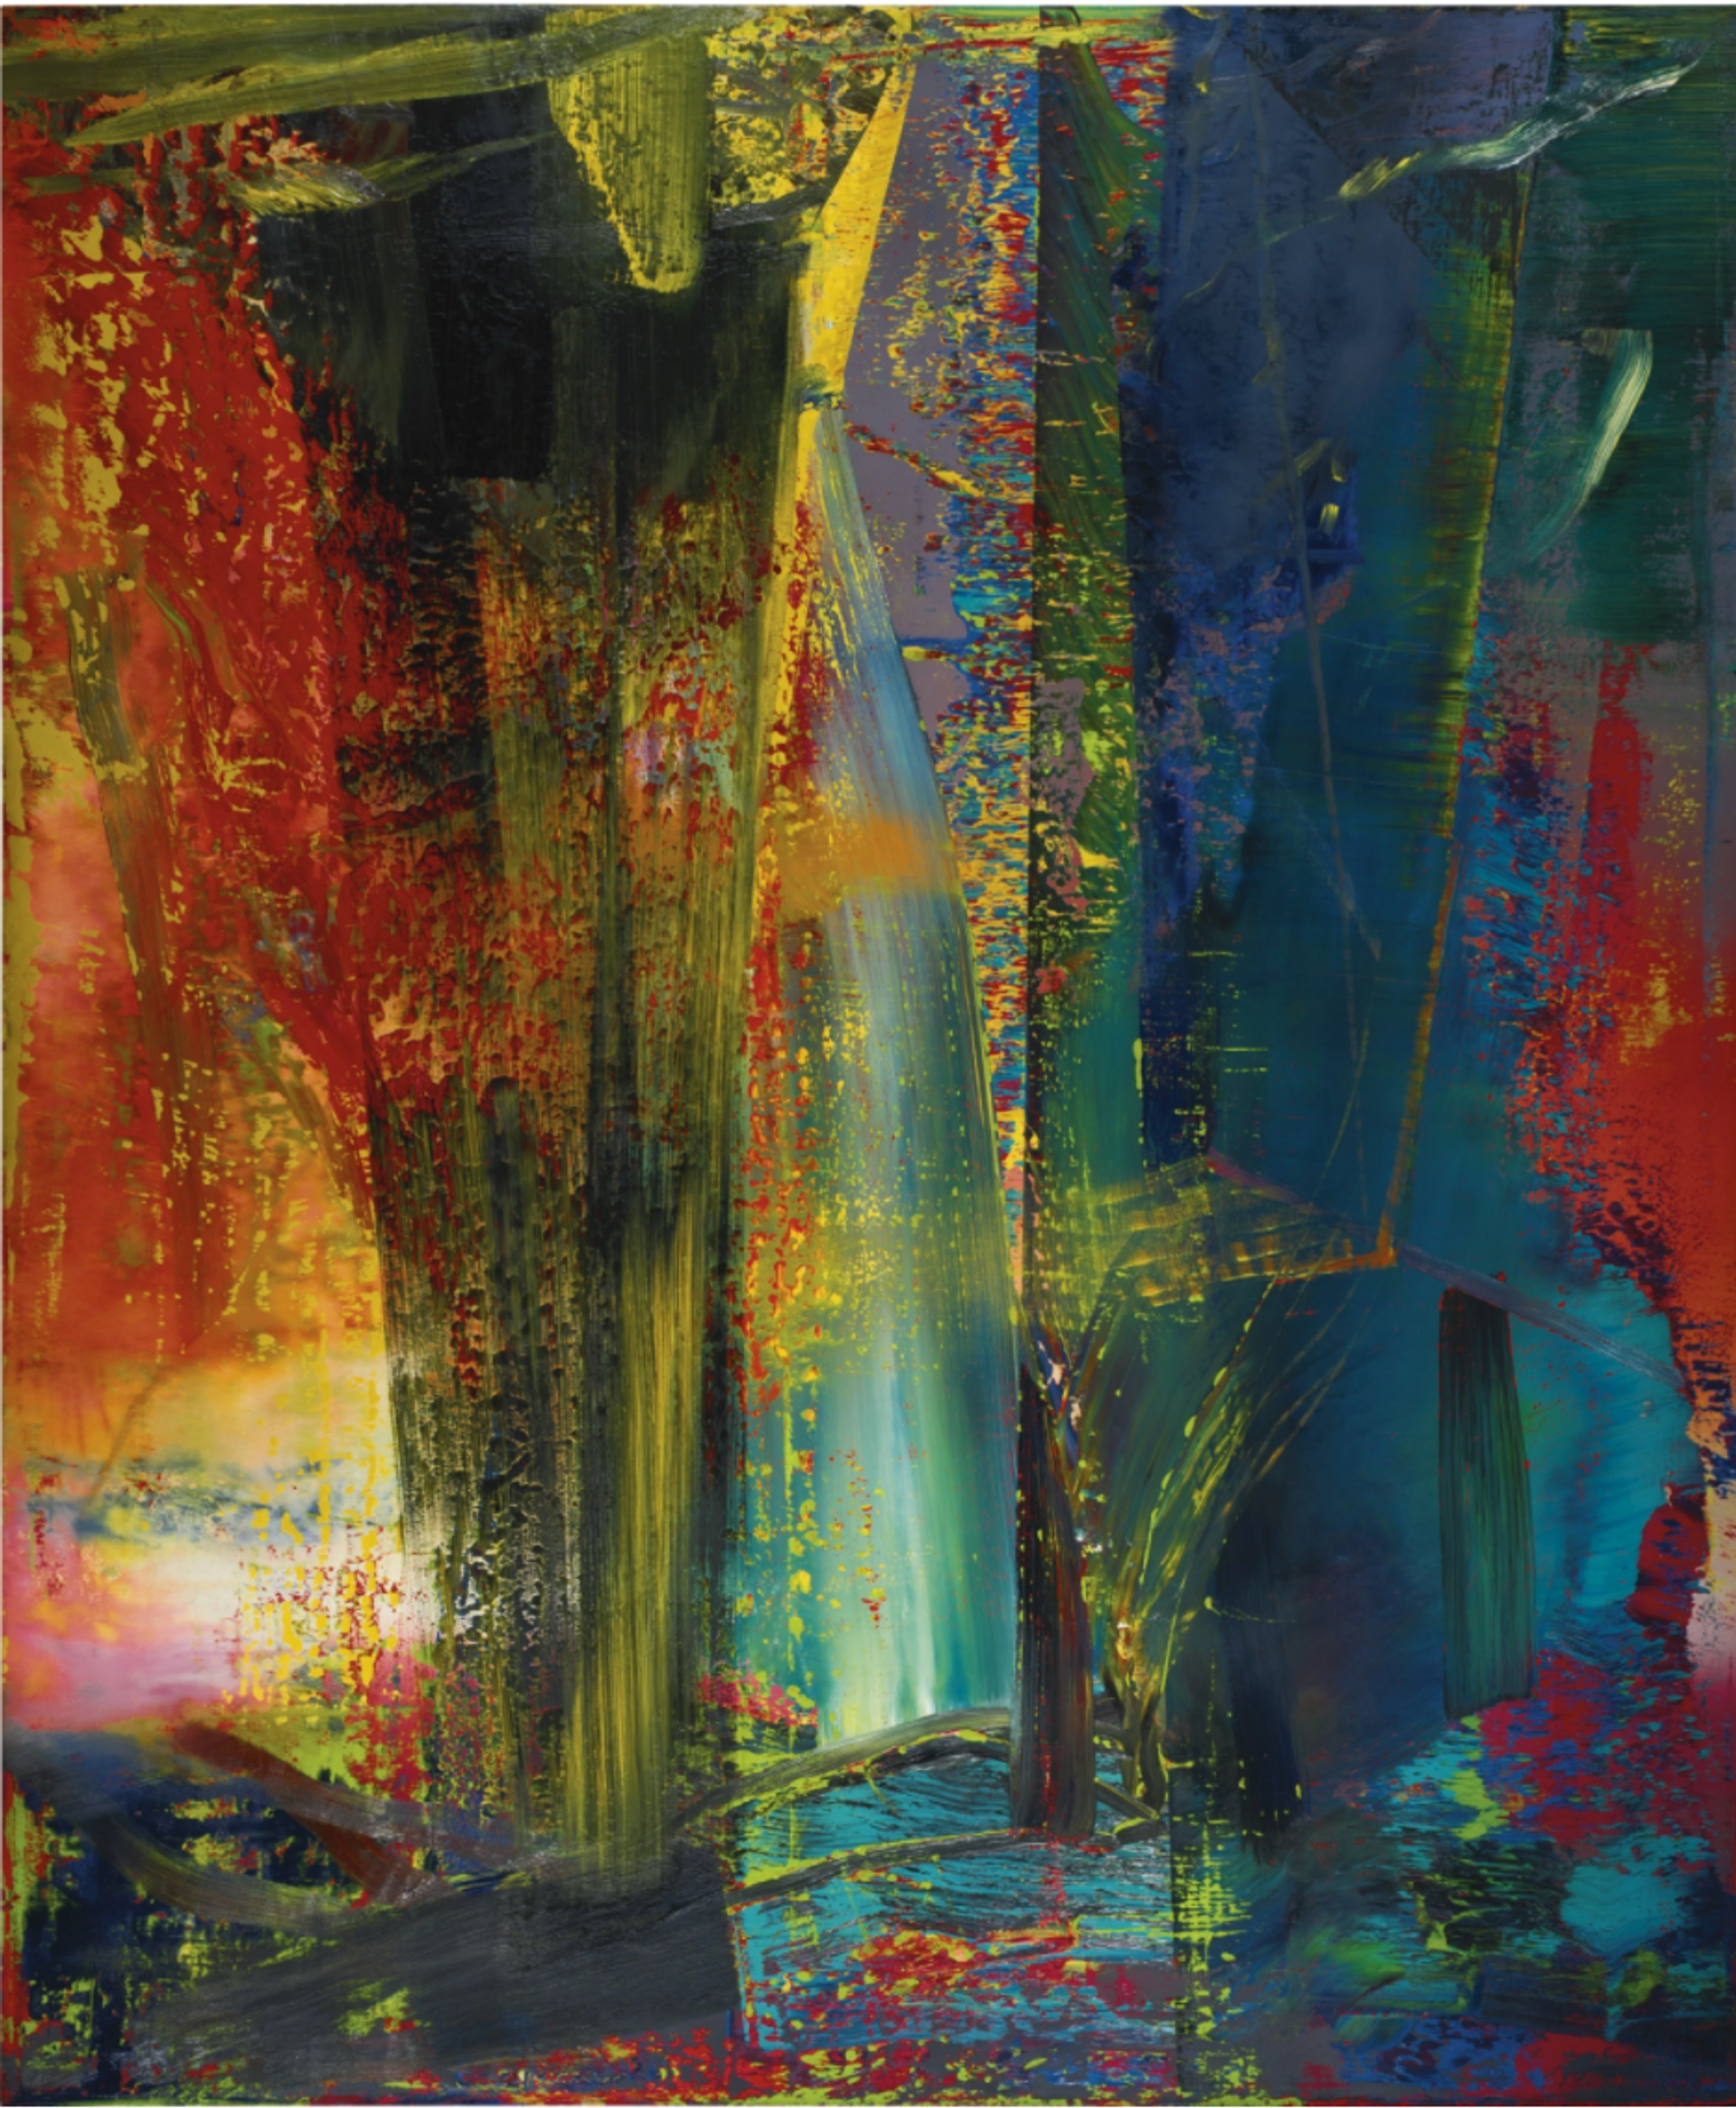 Abstract painting by Gerhard Richter, depicting abstract smears of green, blue, red and yellow paint.